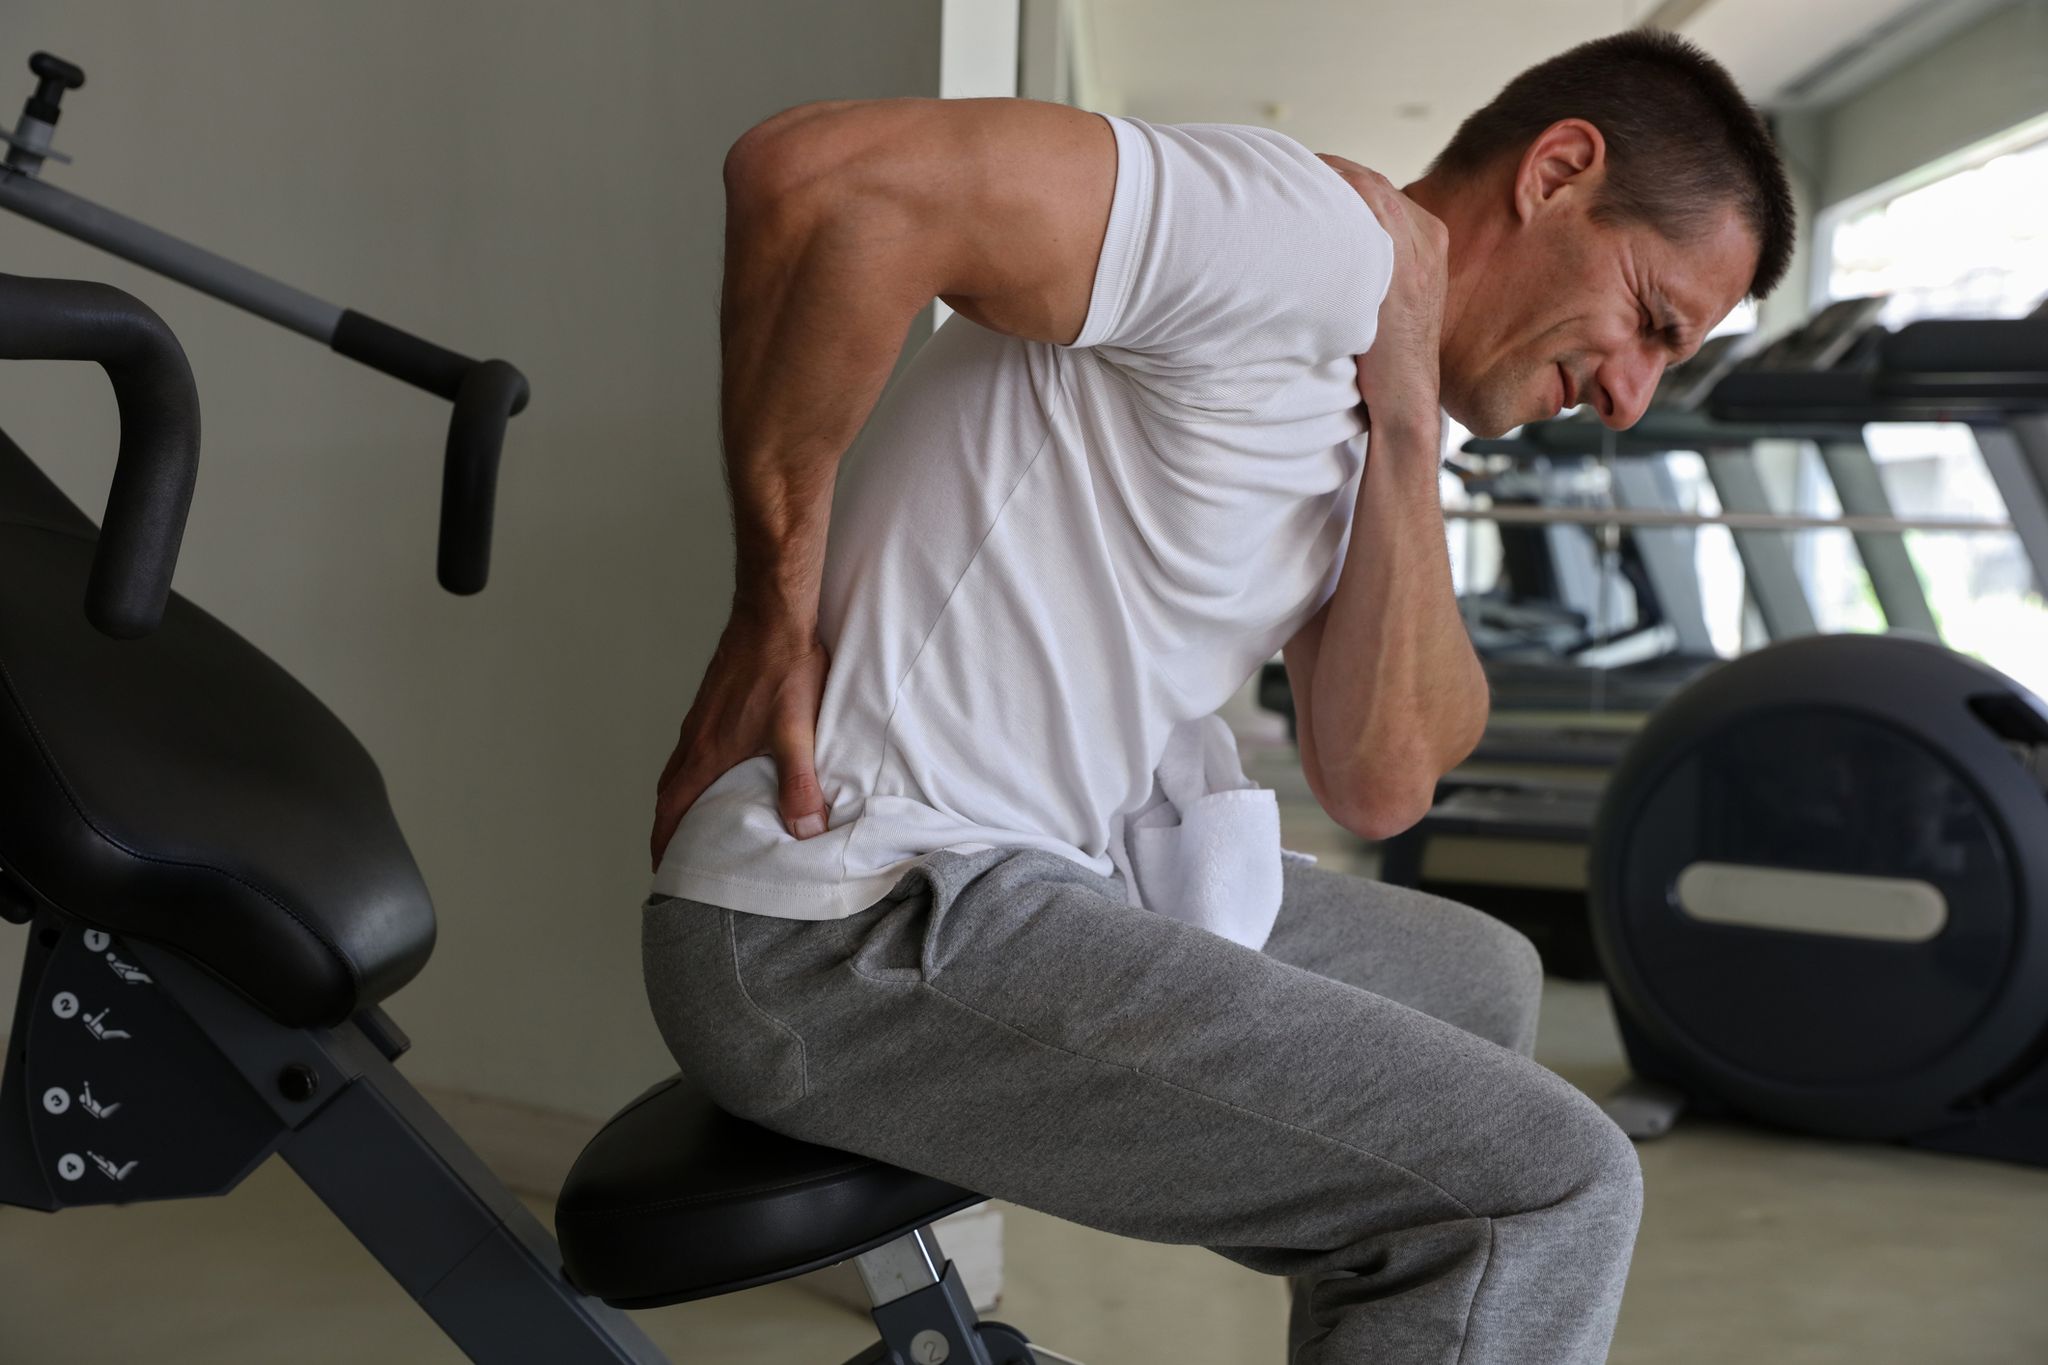 Man with low back pain in gym. Sports exercising injury